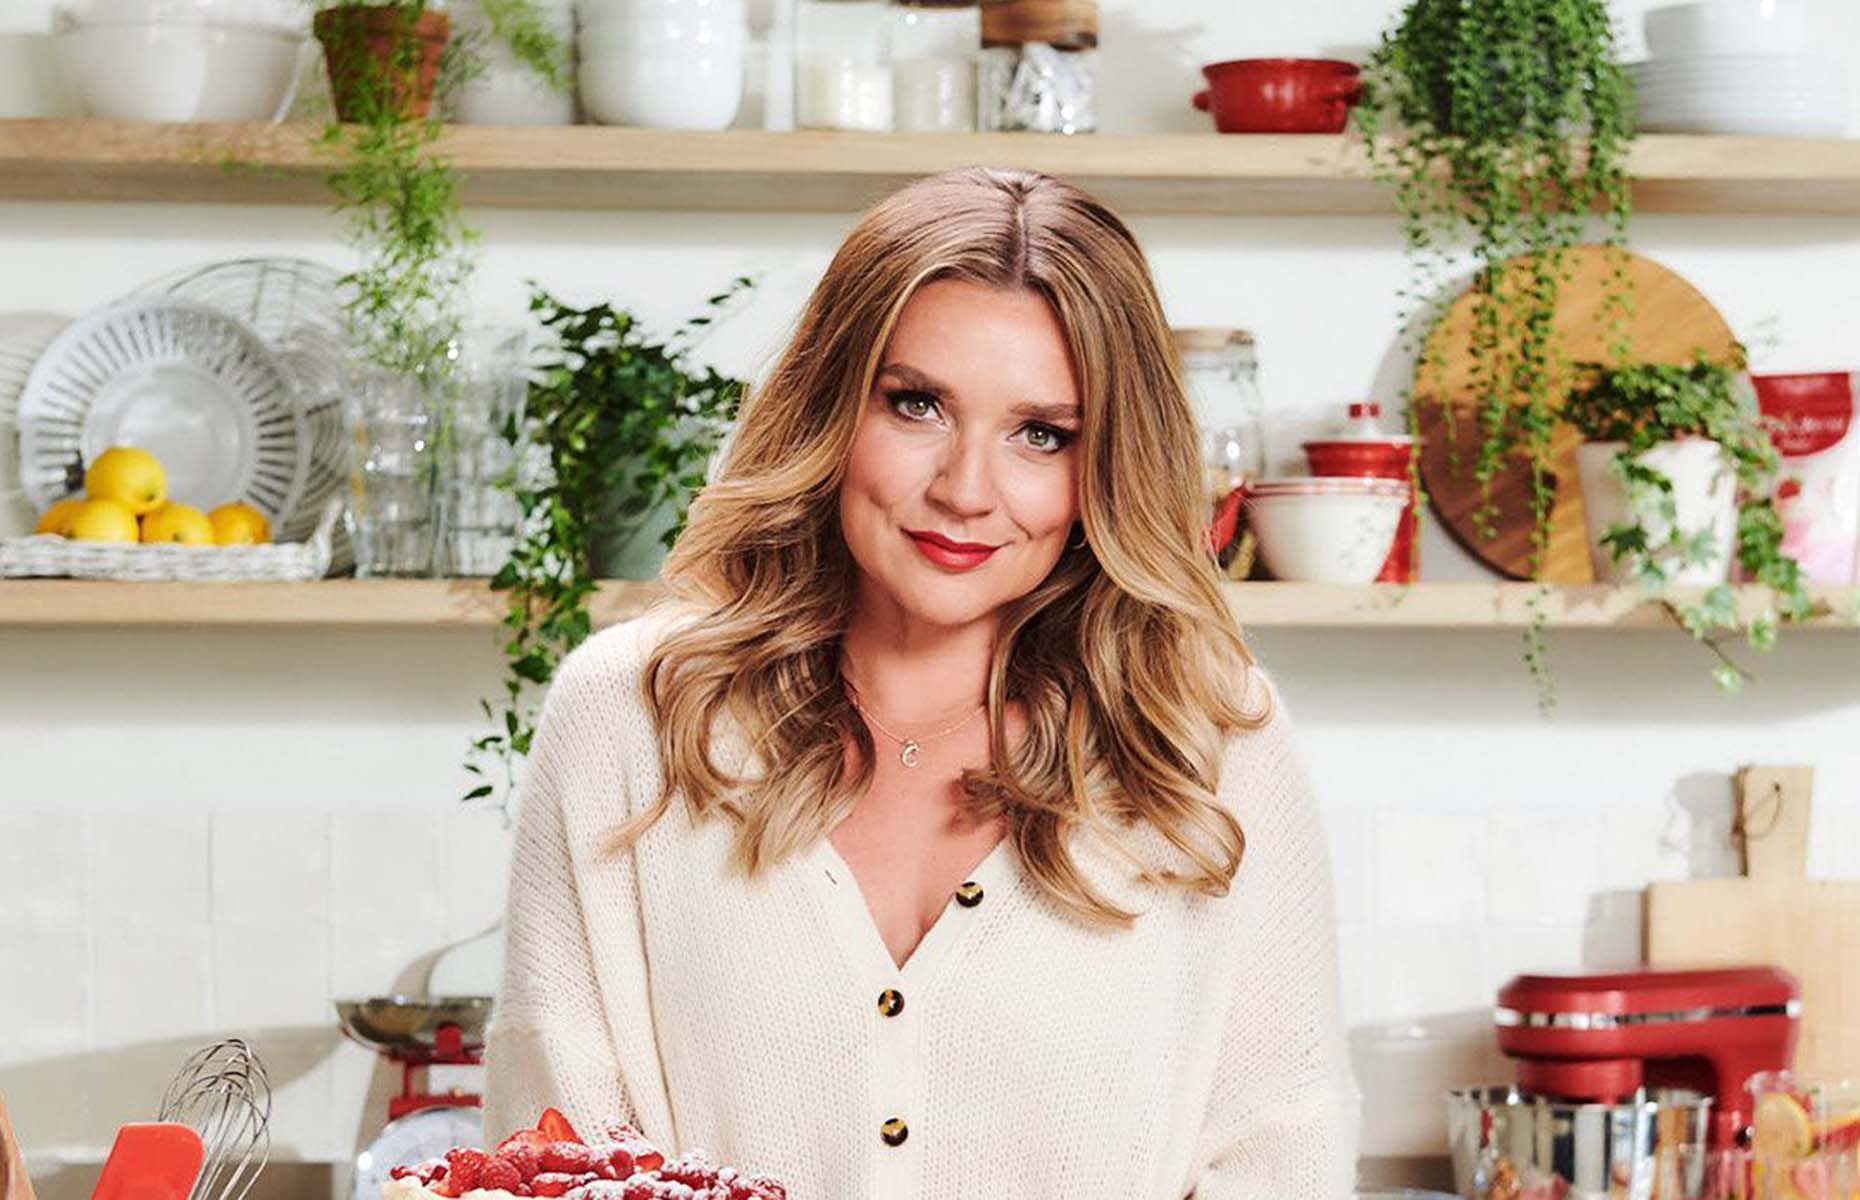 GBBO 2016 winner Candice Brown (Image: Candice Brown/Facebook)